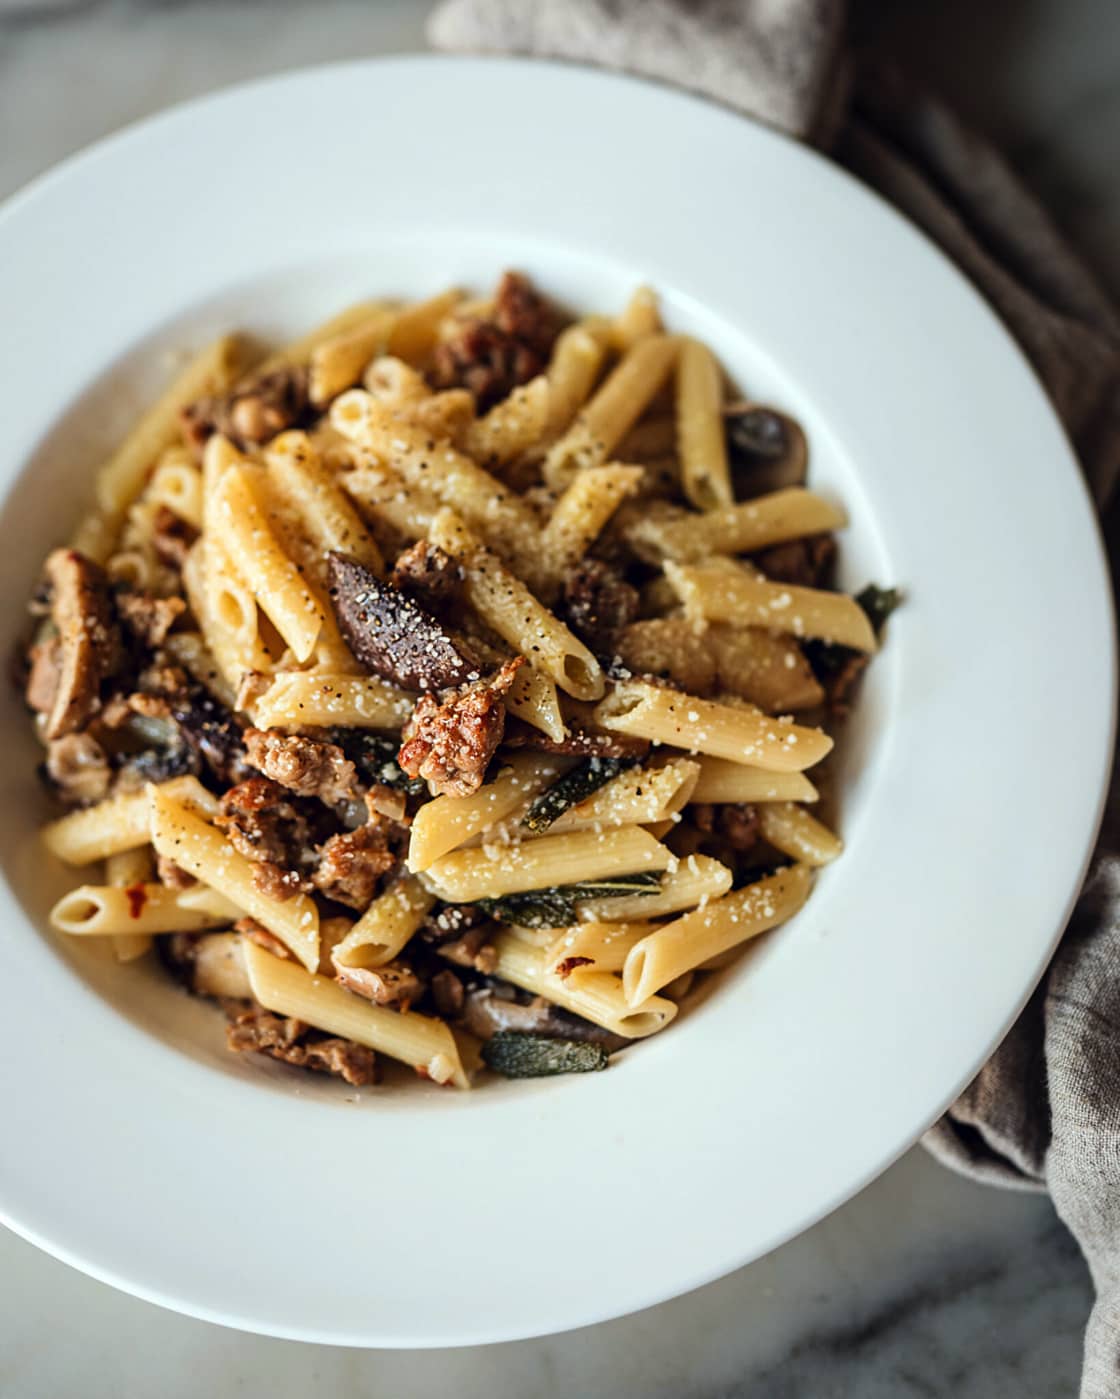 PENNE RIGATE WITH MUSHROOM, SAUSAGE AND SAGE